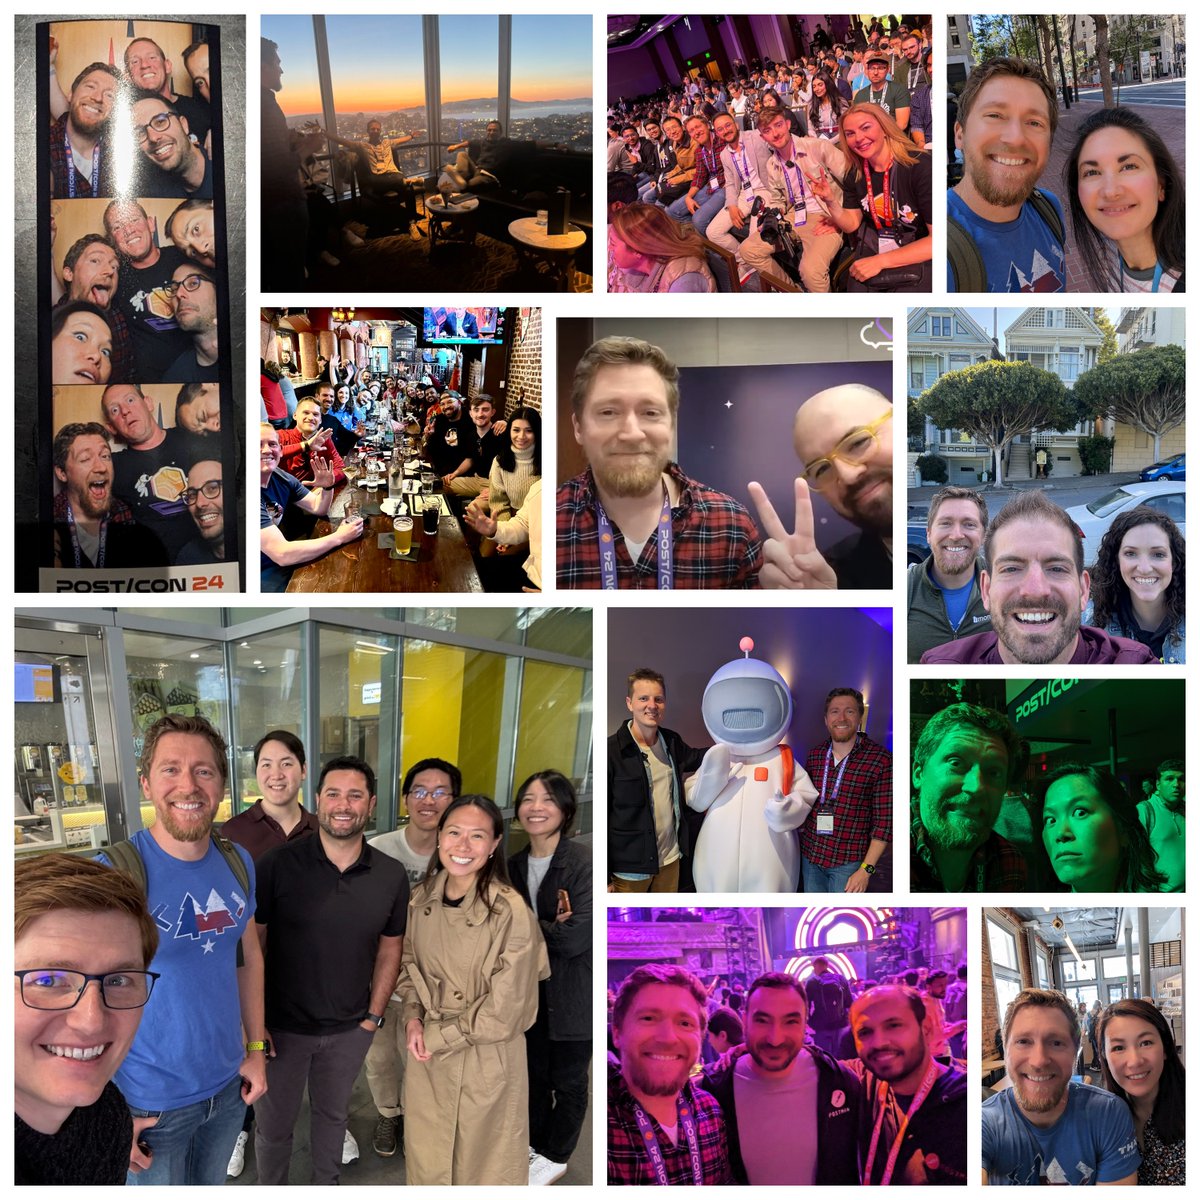 I had an absolutely incredible time in San Francisco this week. It was amazing to meet up with friends I haven't seen in months, some who I've only met virtually, and to make countless new ones. Thank you all for such a memorable experience. See you again soon! 💙 #postcon